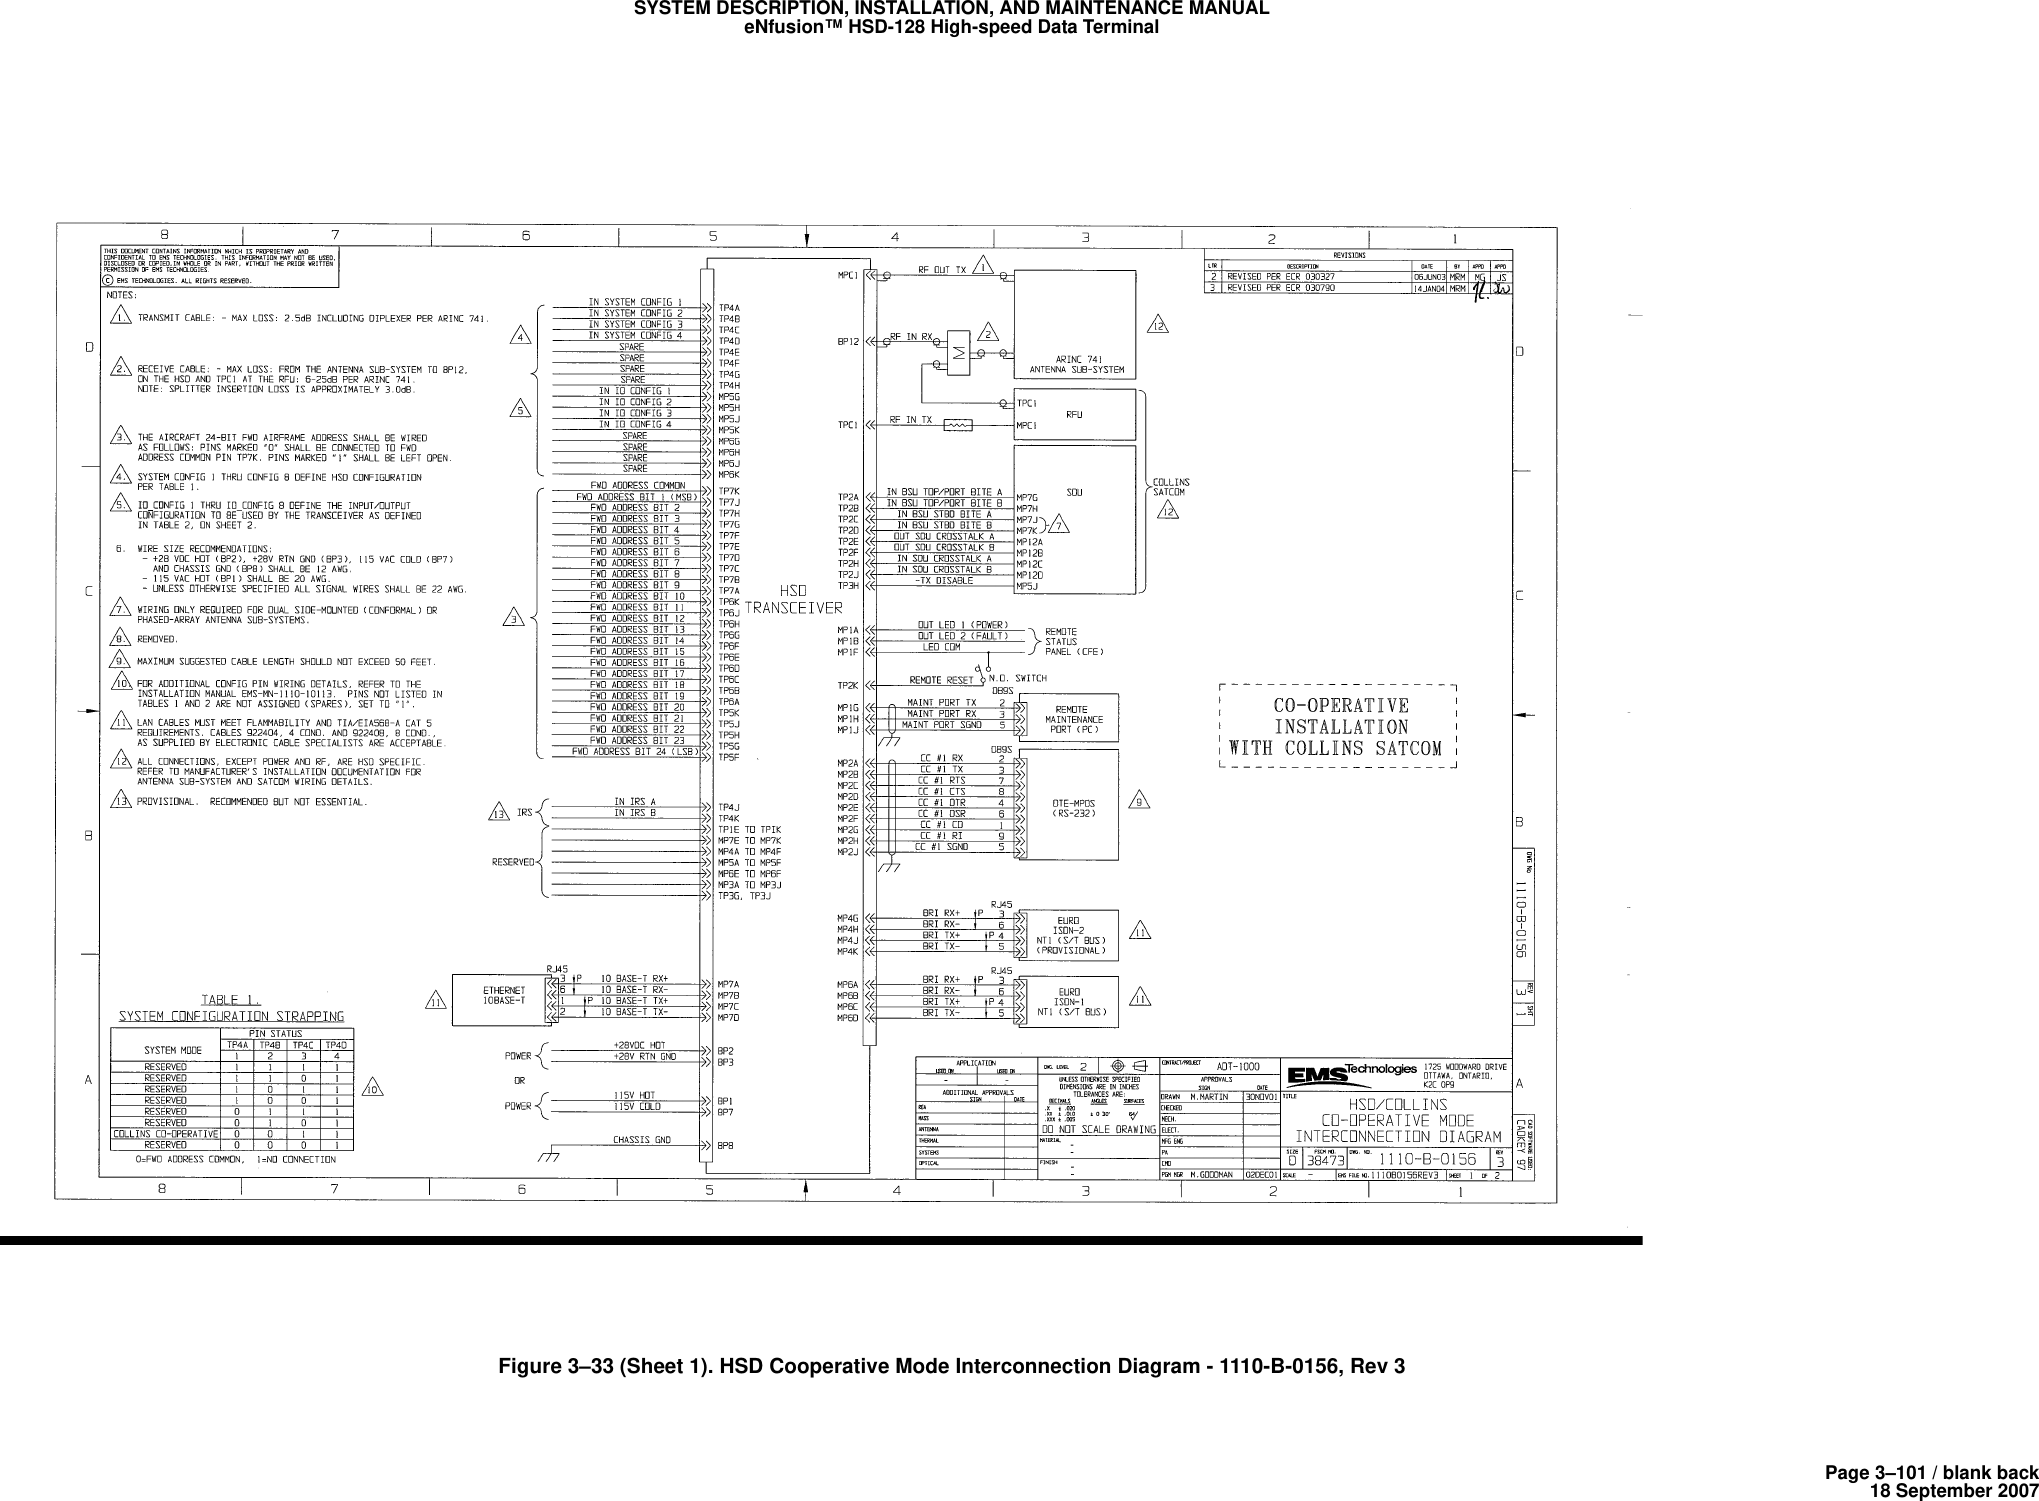 Page 3–101 / blank back18 September 2007SYSTEM DESCRIPTION, INSTALLATION, AND MAINTENANCE MANUALeNfusion™ HSD-128 High-speed Data TerminalFigure 3–33 (Sheet 1). HSD Cooperative Mode Interconnection Diagram - 1110-B-0156, Rev 3